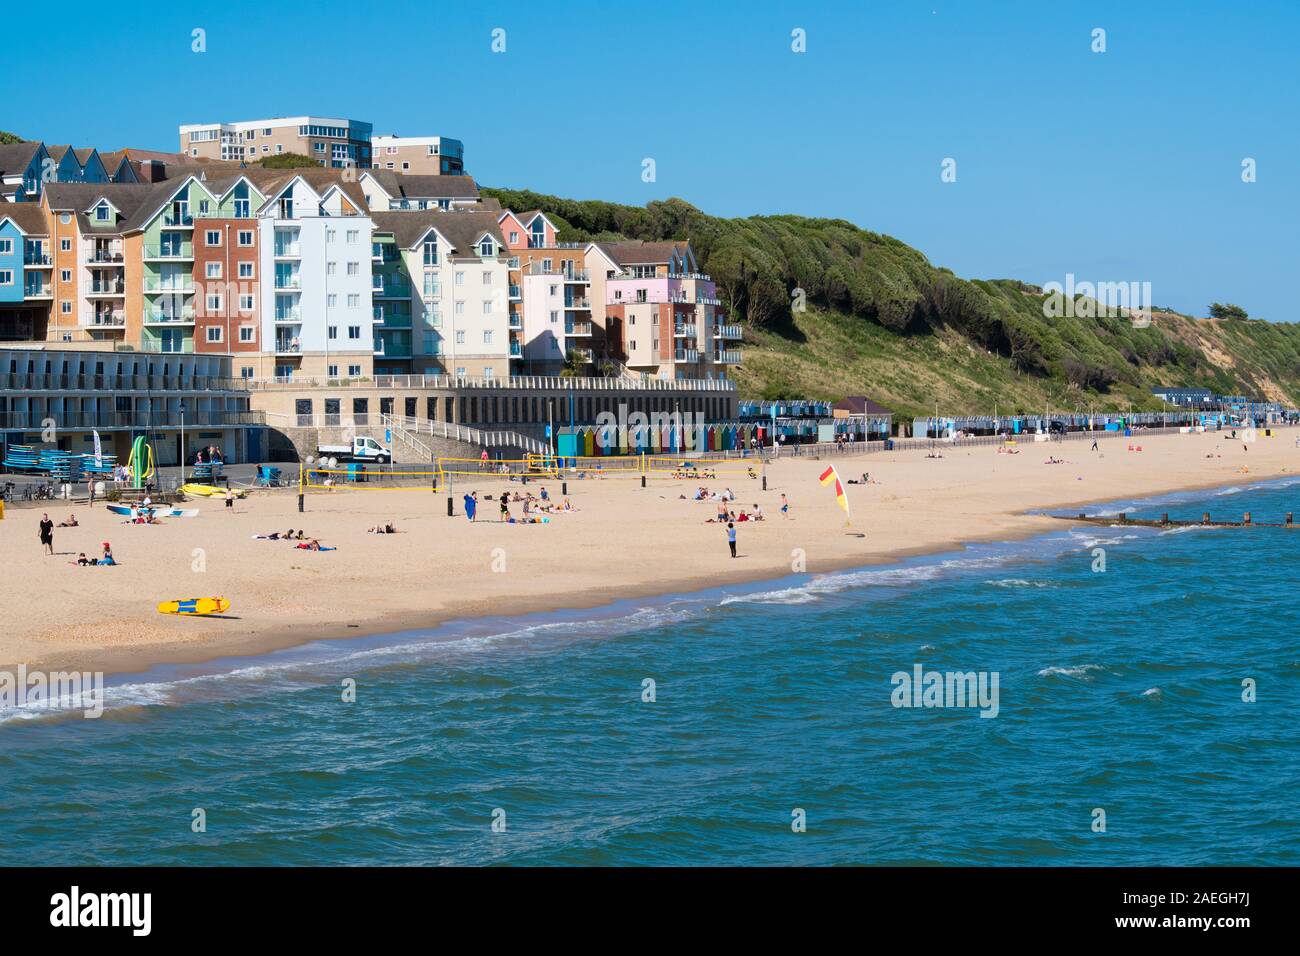 View of the seafront near Durley Chine, West Cliff, Bournemouth England UK Stock Photo